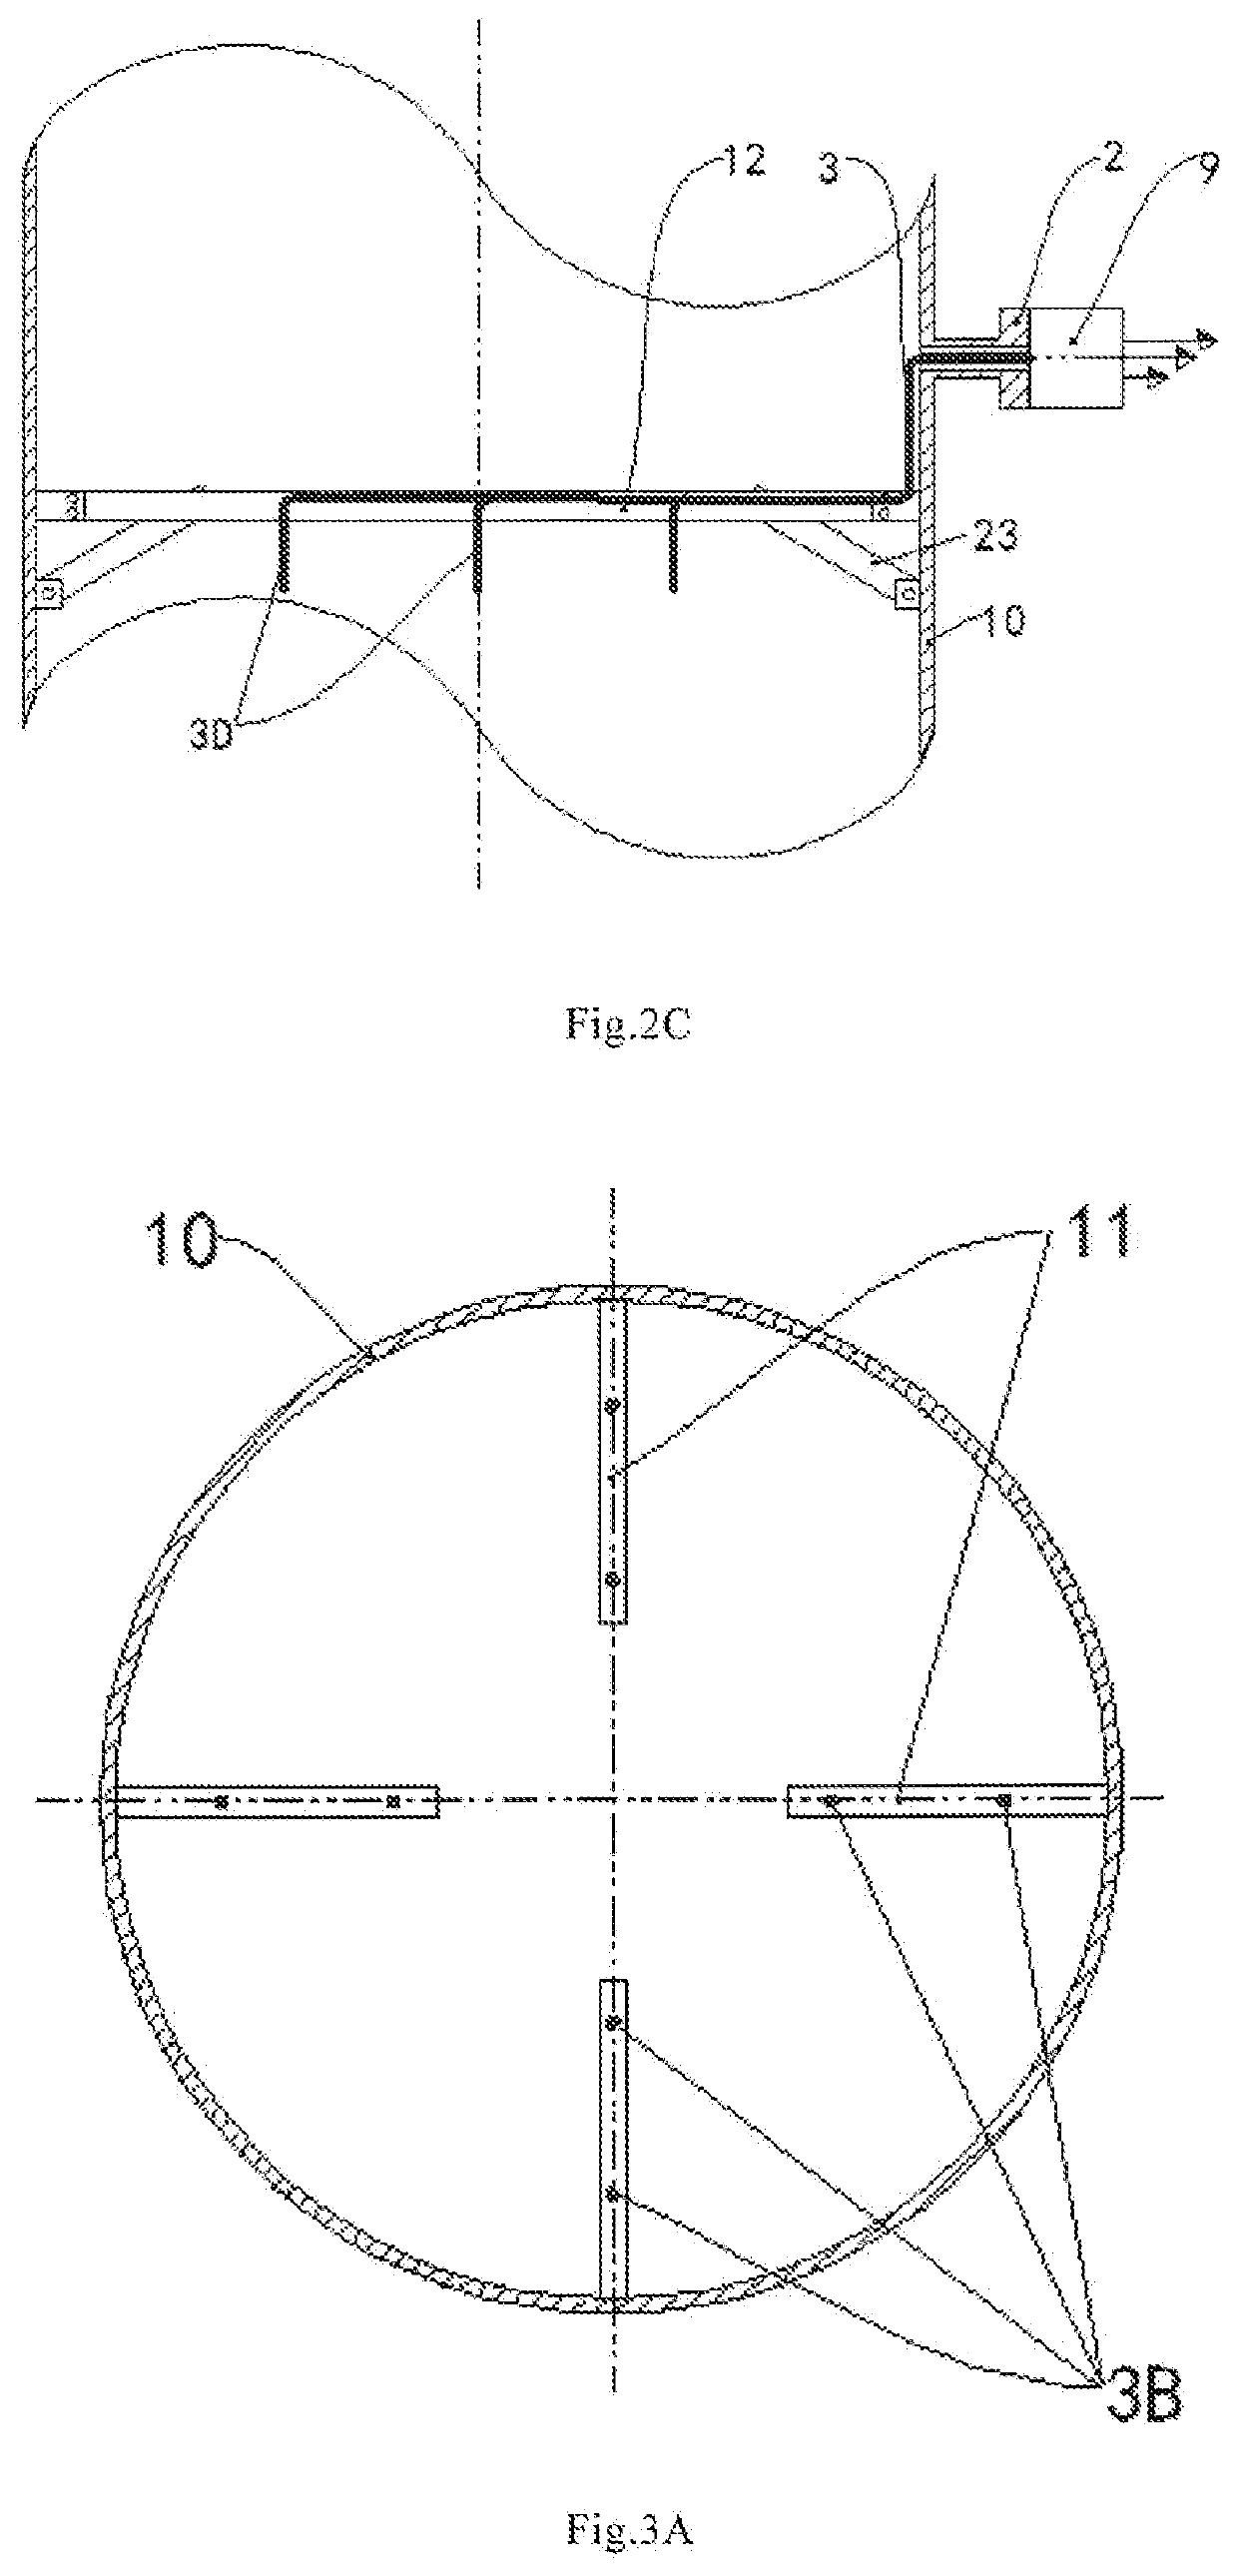 Thermocouple structure